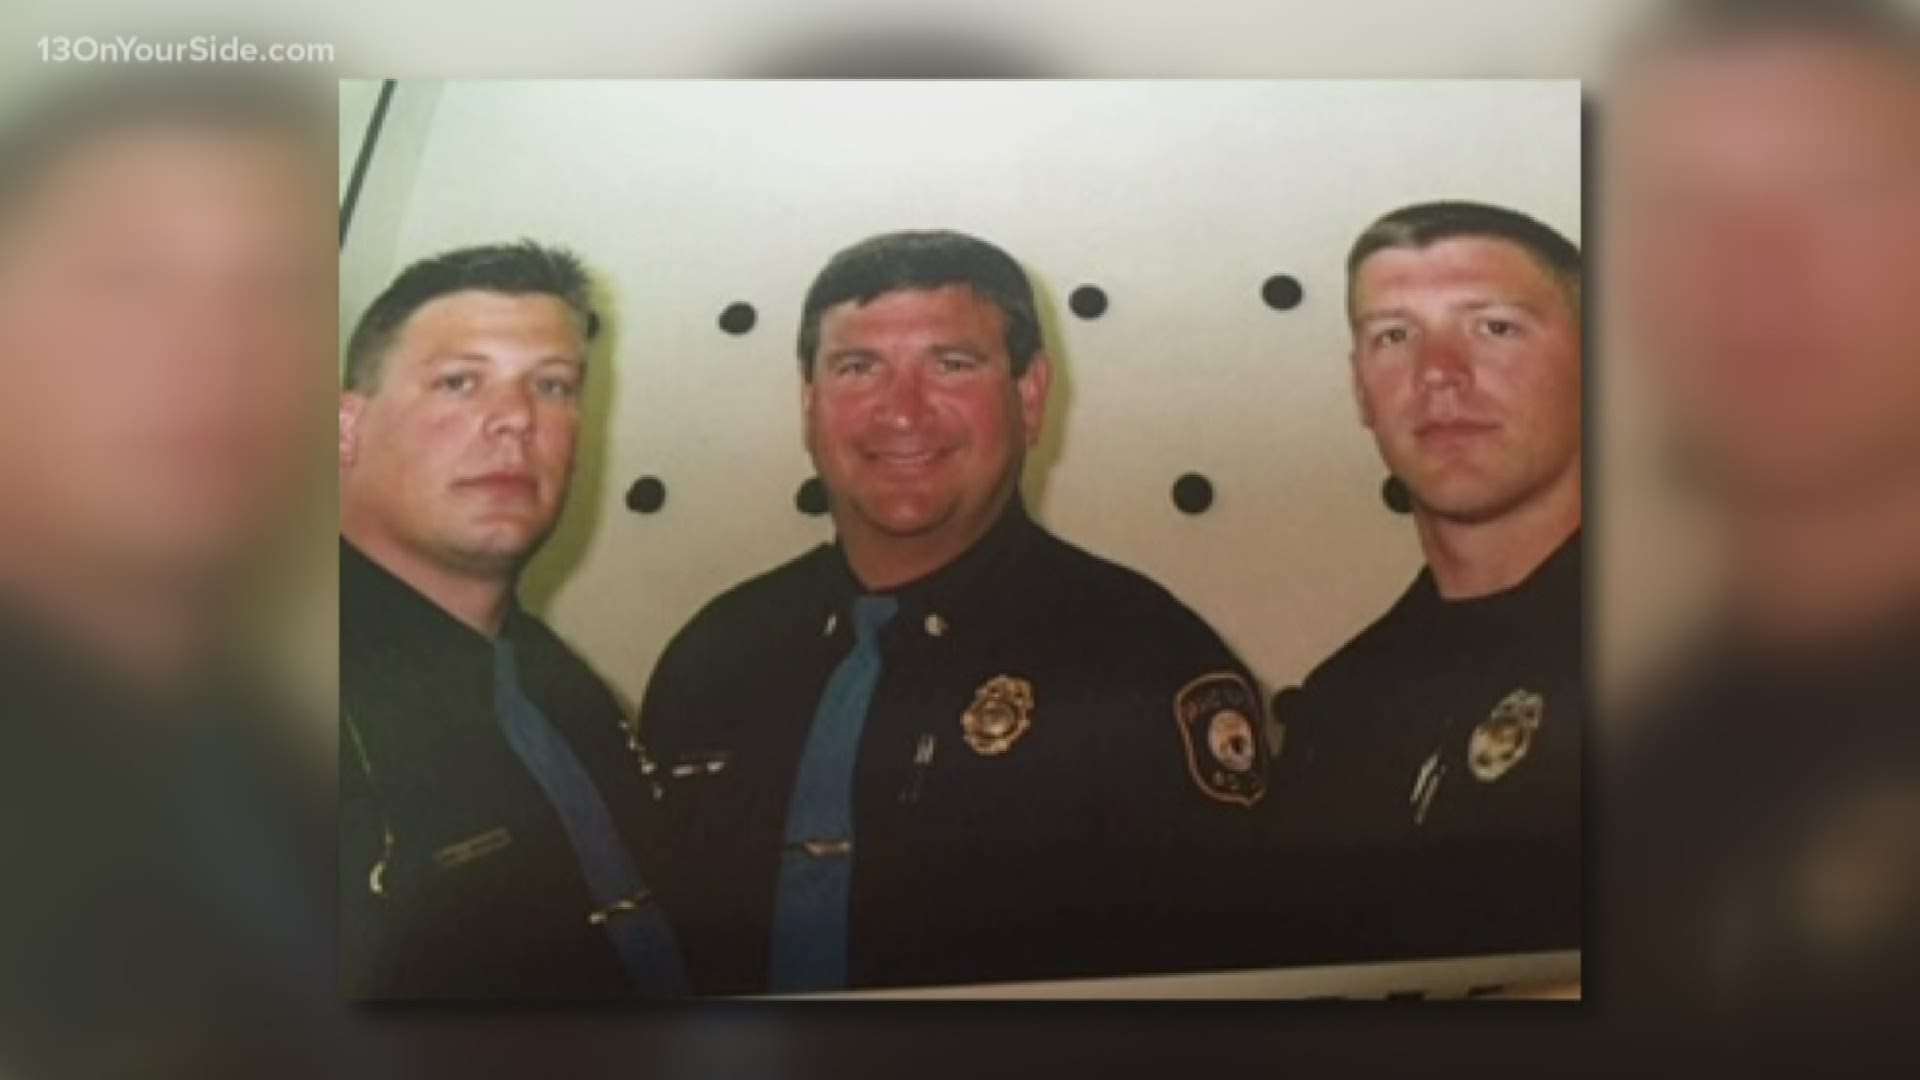 Brothers make history for Grand Rapids P.D.